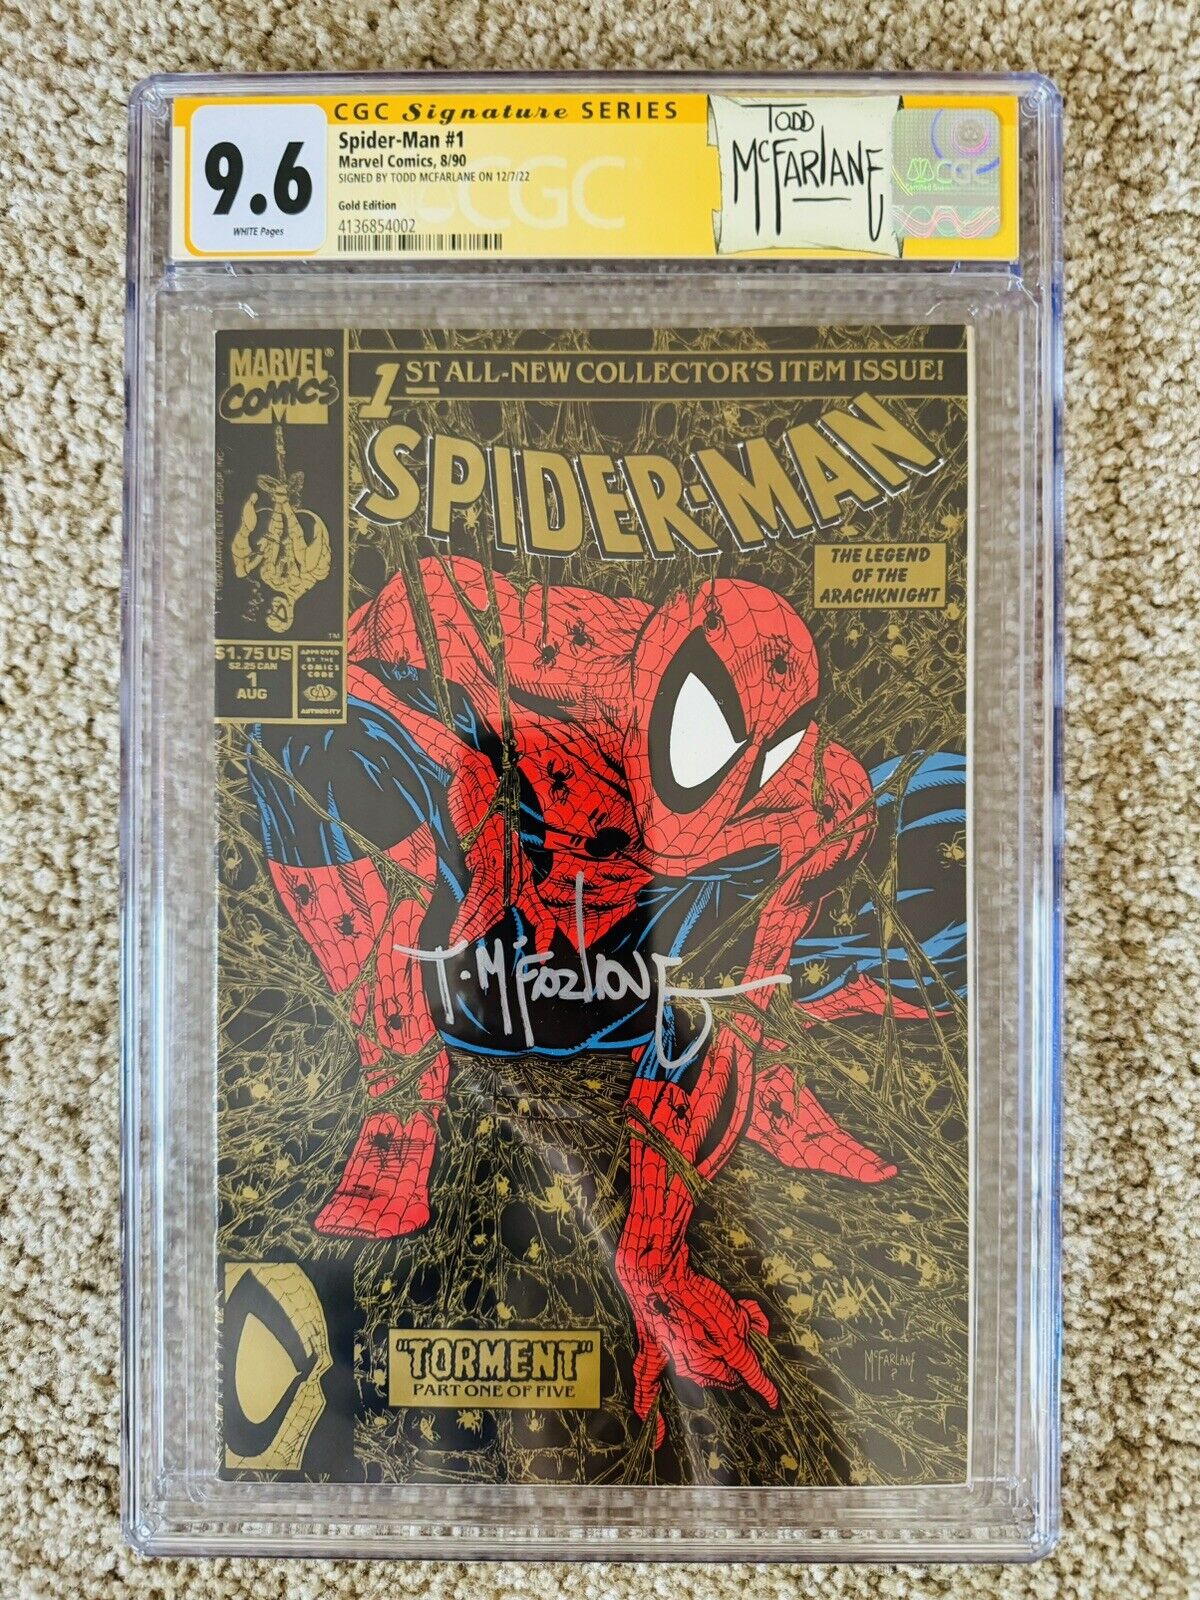 SPIDER-MAN #1 (1990) GOLD CGC 9.6 WHITE PAGES SIGNED TODD MCFARLANE CUSTOM LABEL